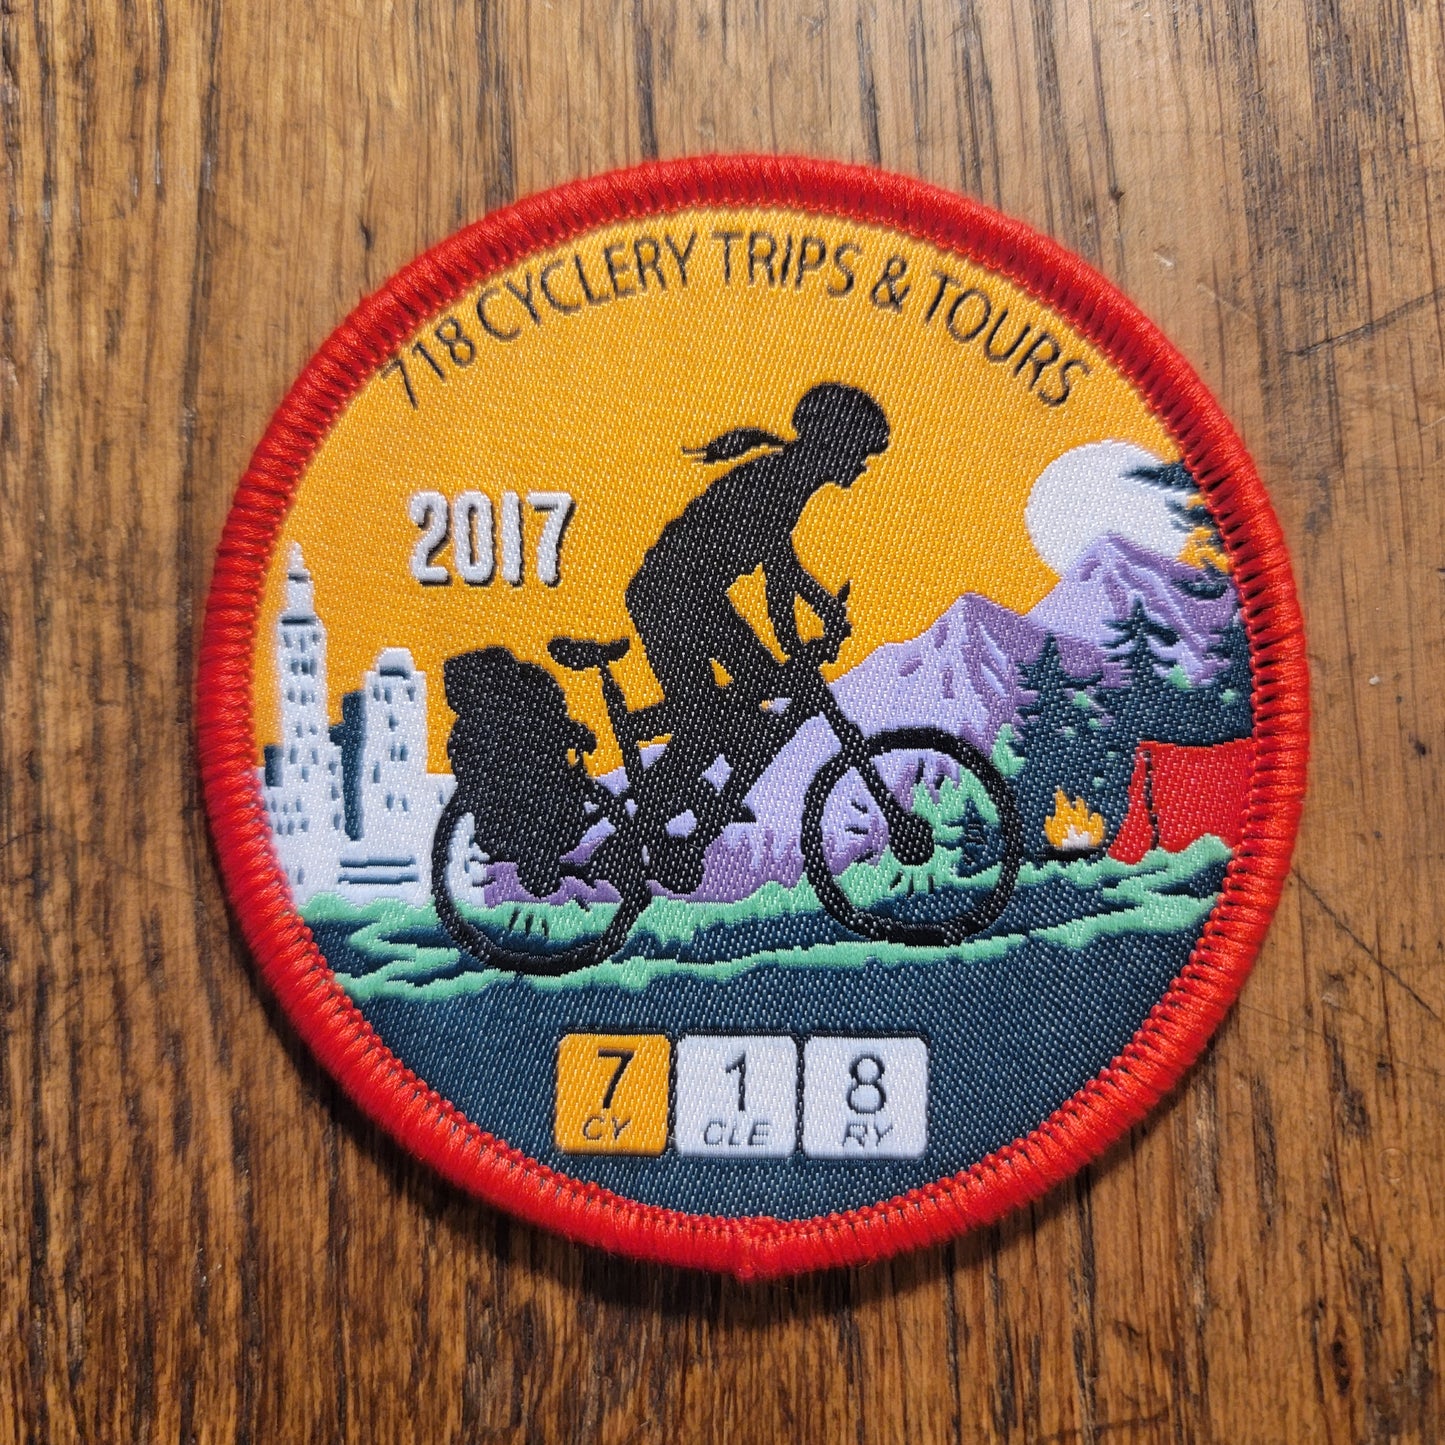 2017 718 Trips and Tours Patch